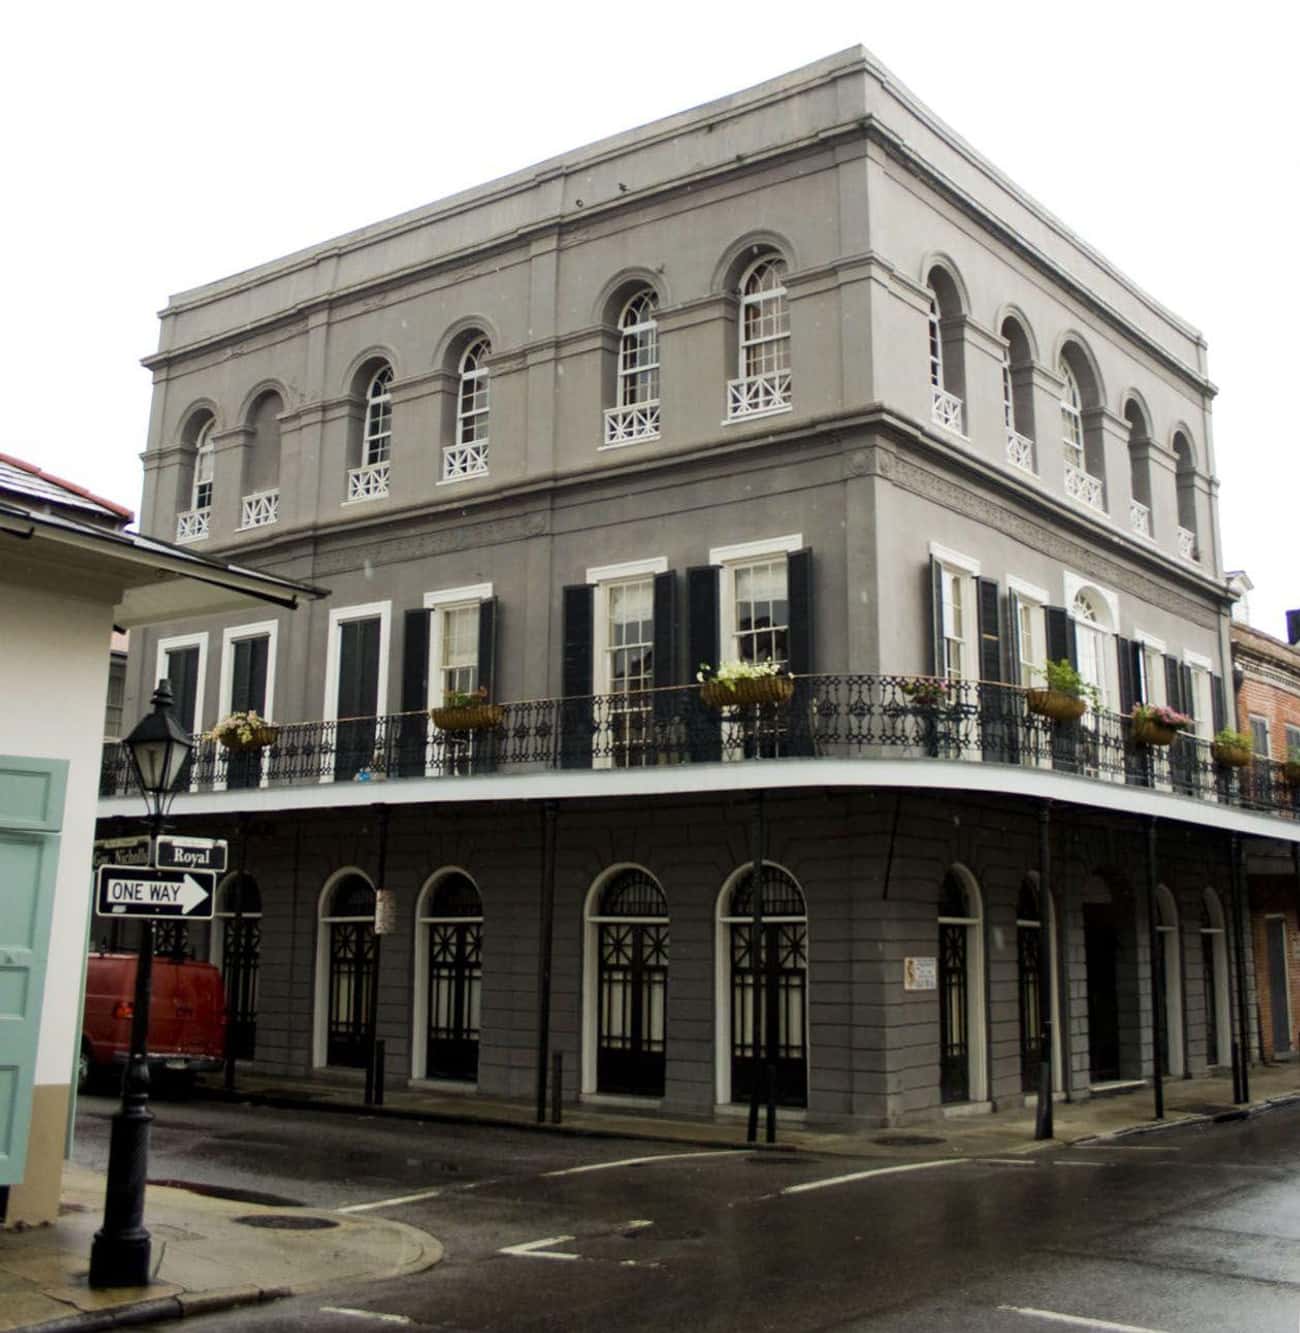 Socialite Delphine LaLaurie Tormented And Murdered Enslaved People In Her Home